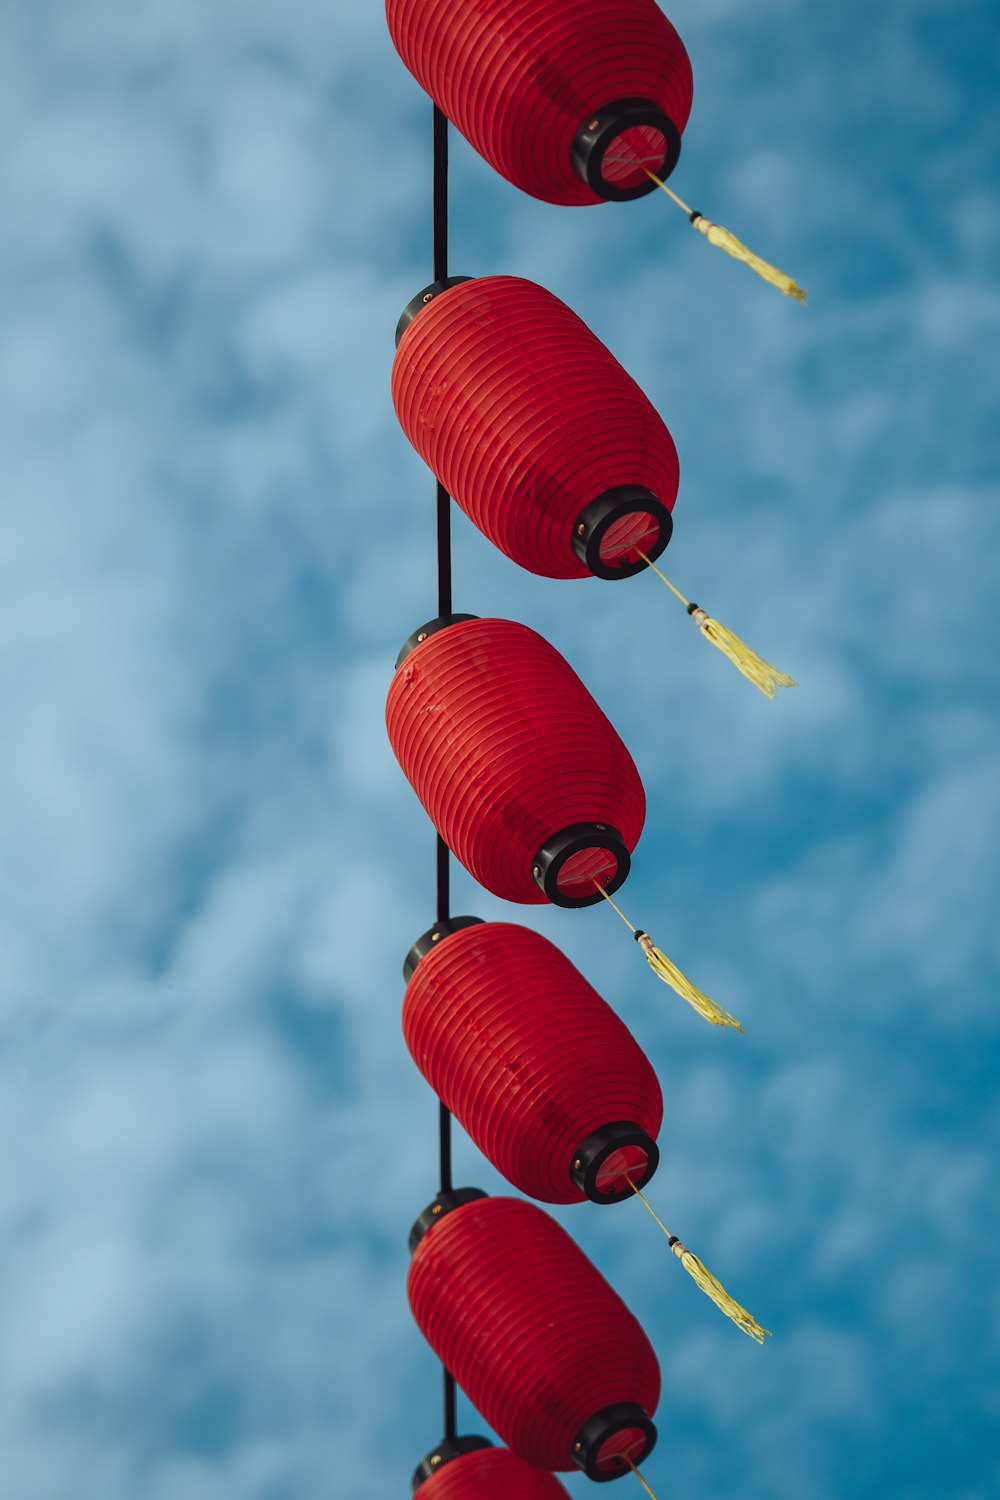 five red lanterns hanging from a pole in the sky